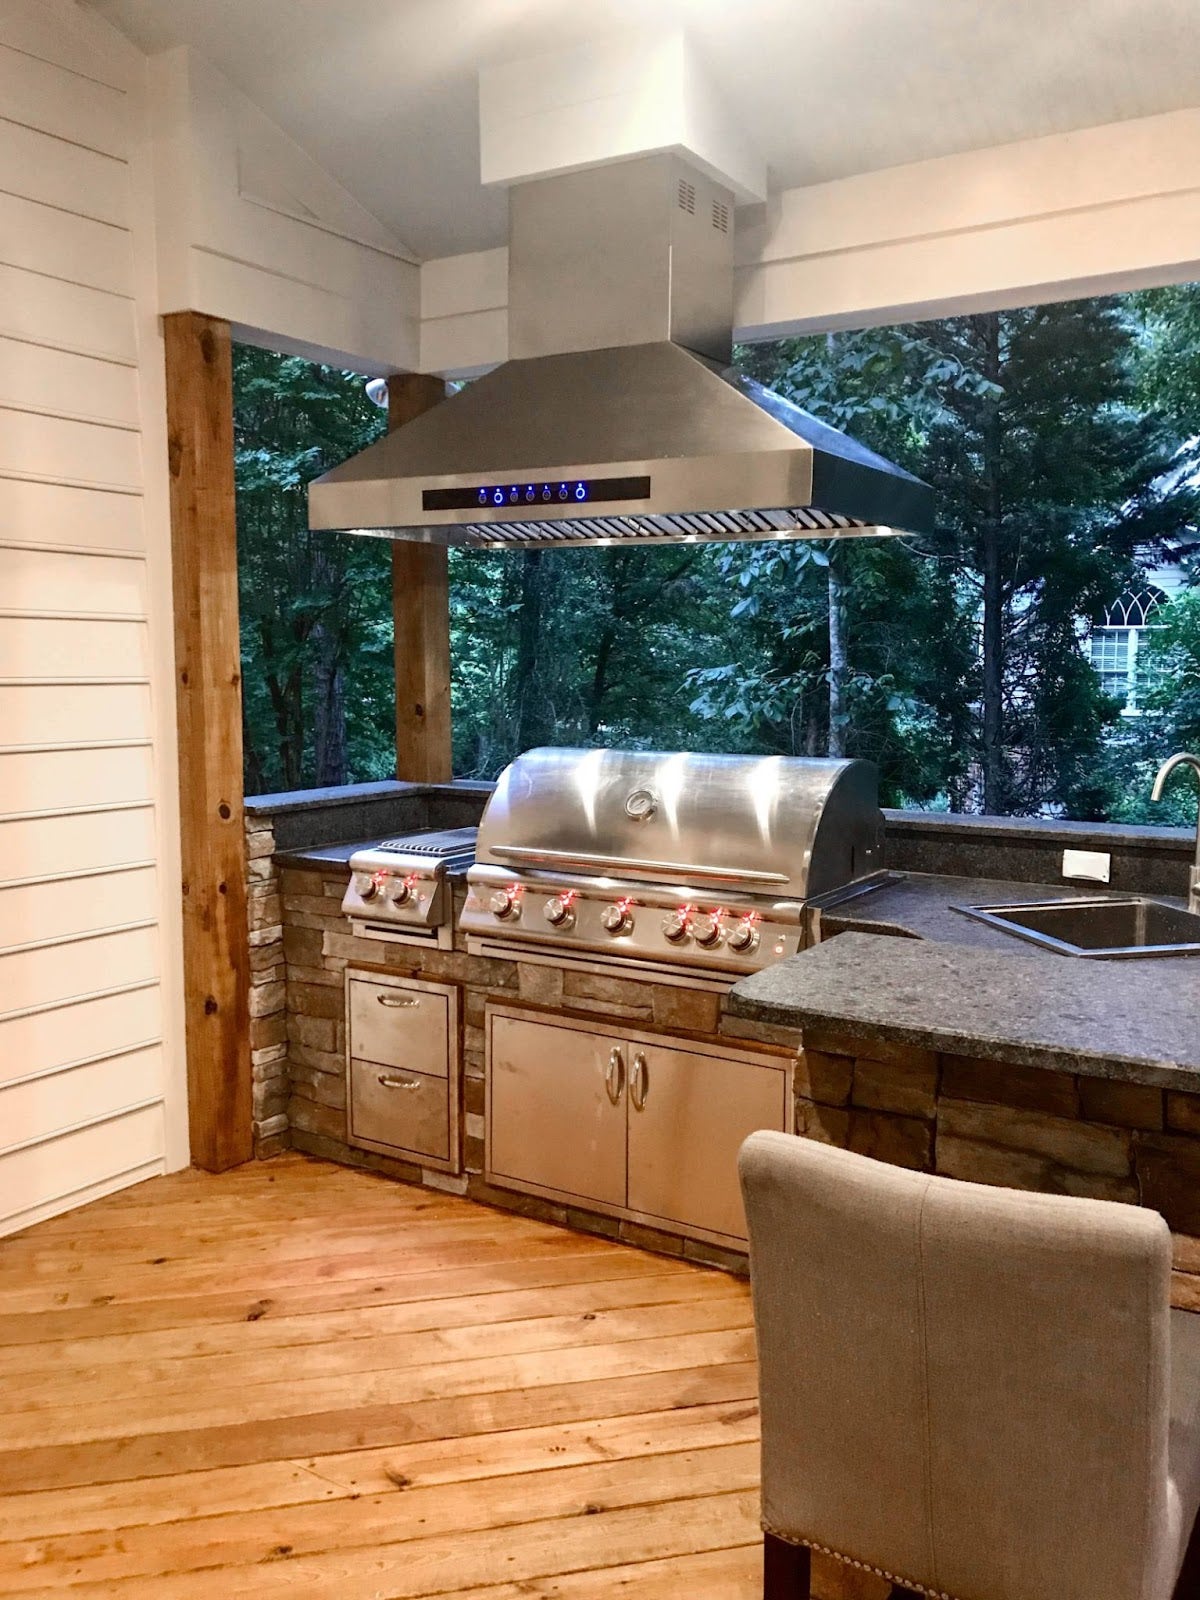 Serene outdoor kitchen setup with a stainless steel Proline range hood and rustic wooden and stone design - prolinerangehoods.com